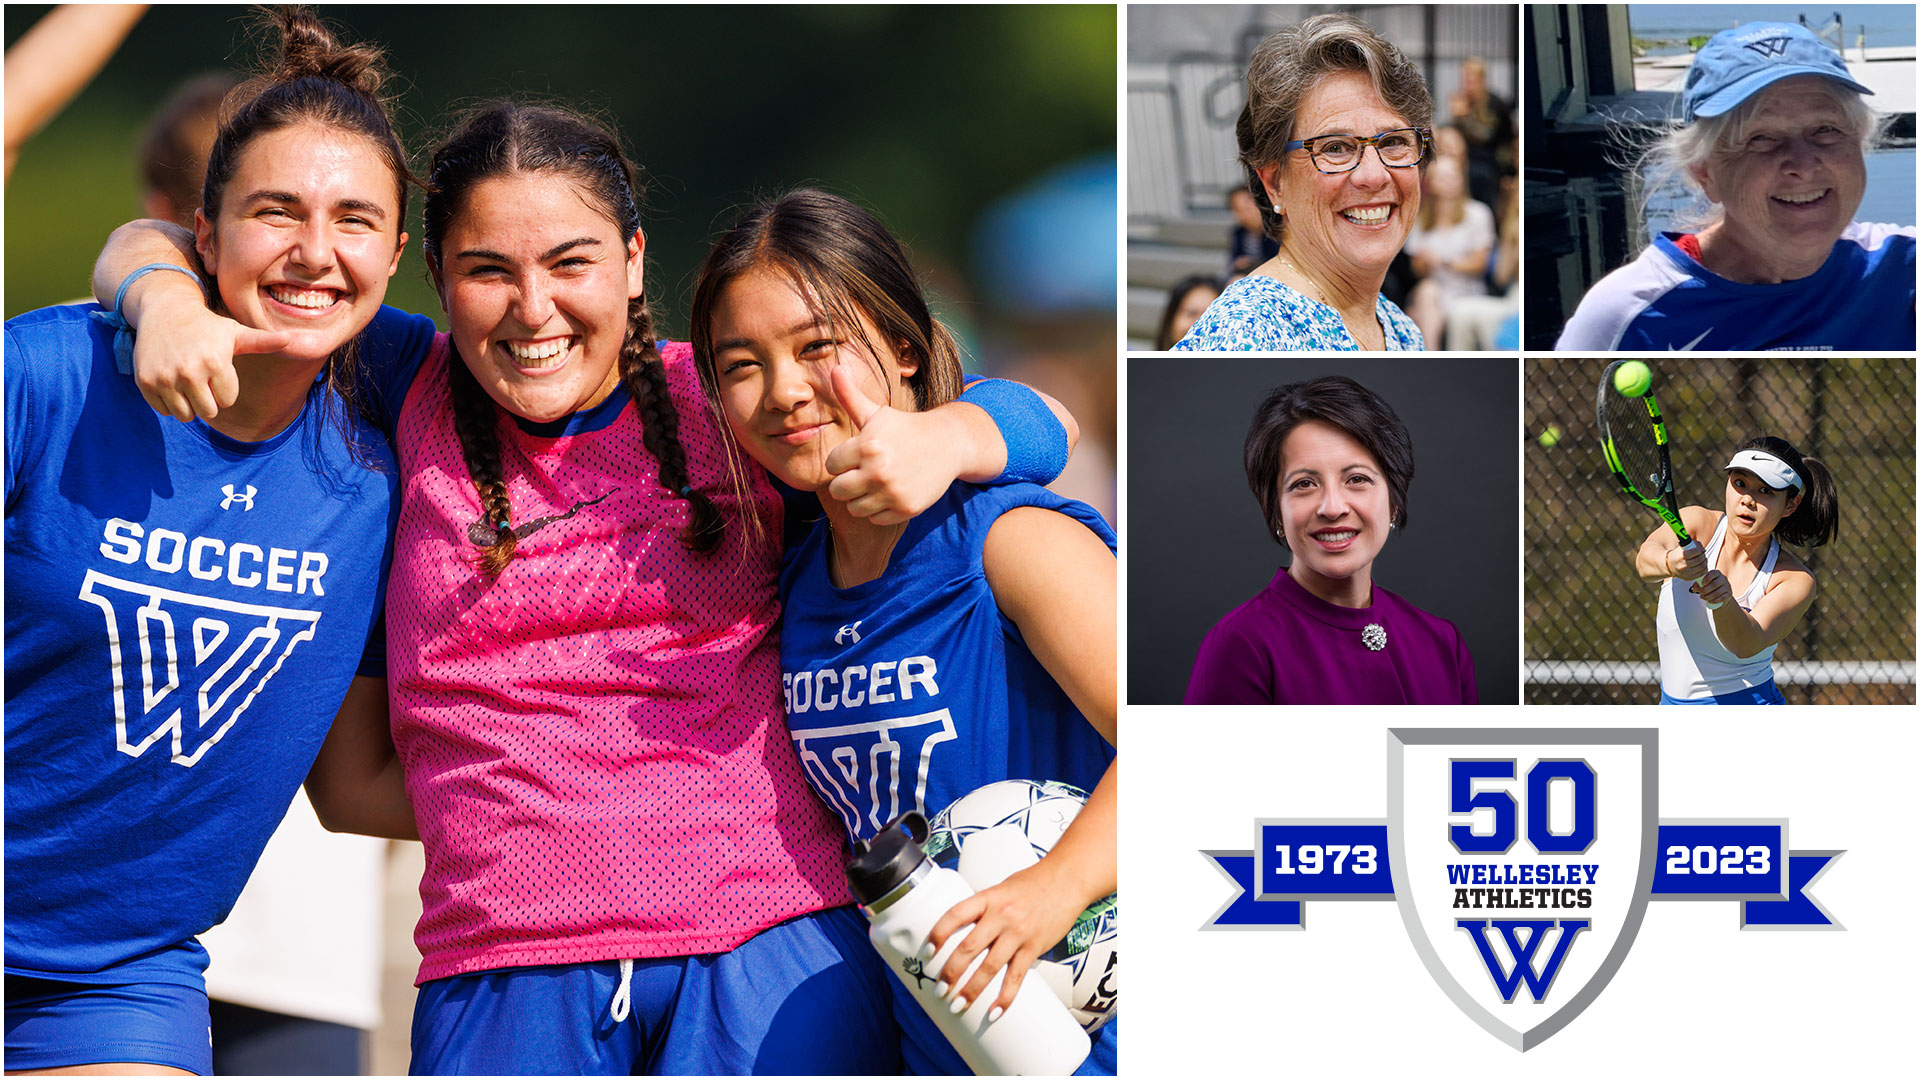 50th Anniversary Reception & Panel, Soccer Senior Day Highlight Upcoming Friends & Family Weekend at Wellesley